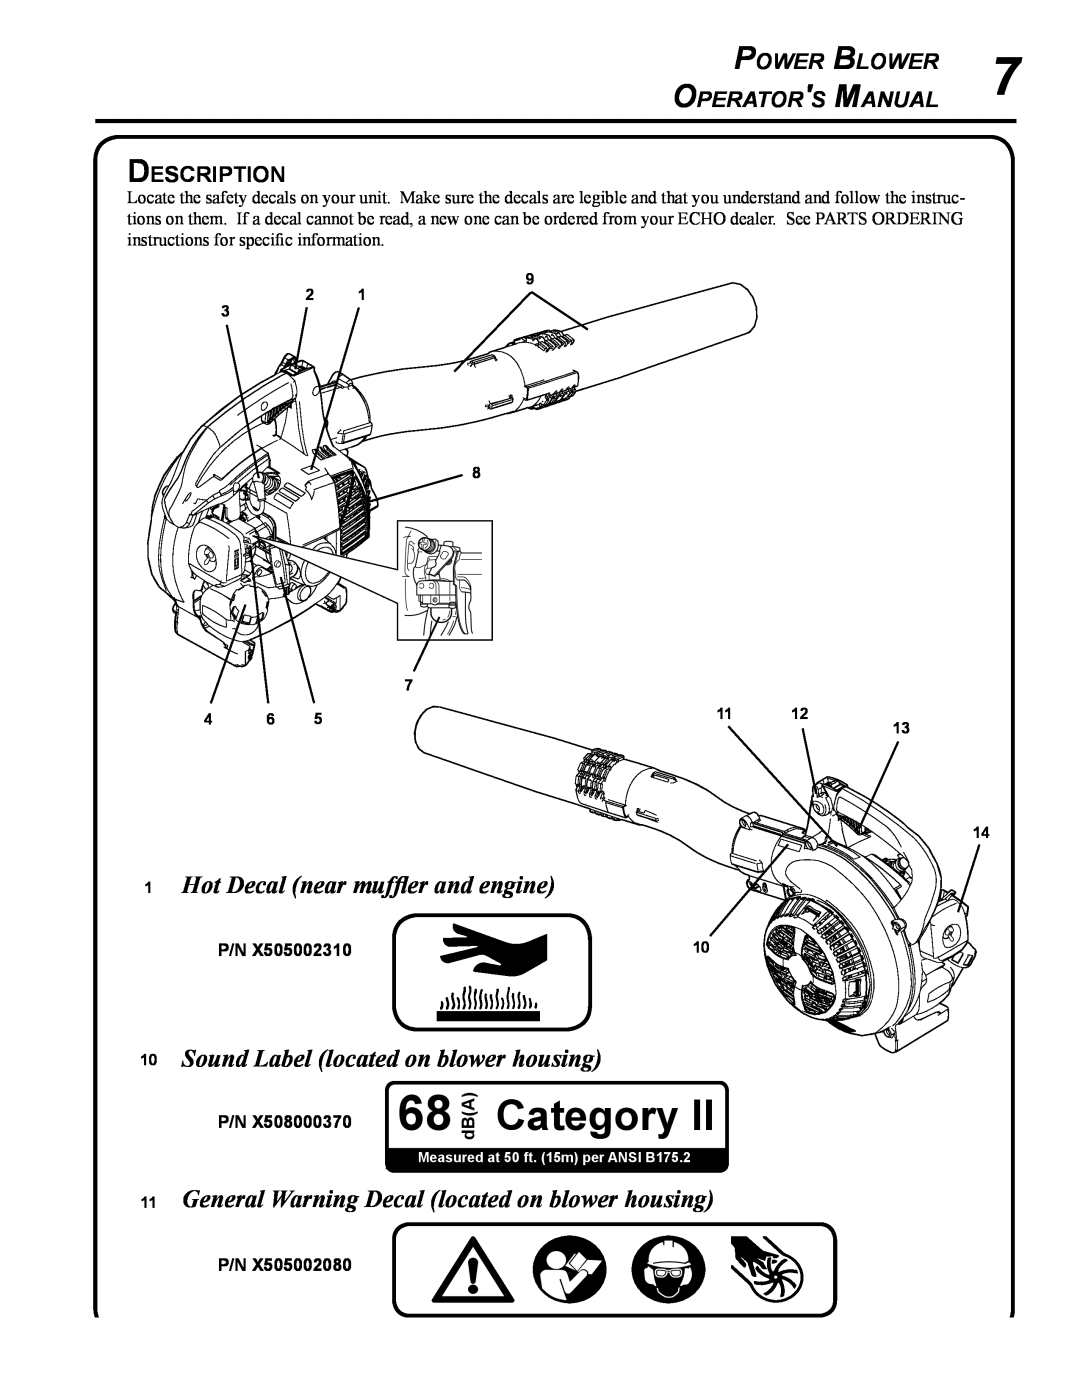 Echo PB-250 manual Hot Decal near muffler and engine, Sound Label located on blower housing, Description, 68dBA, Category 